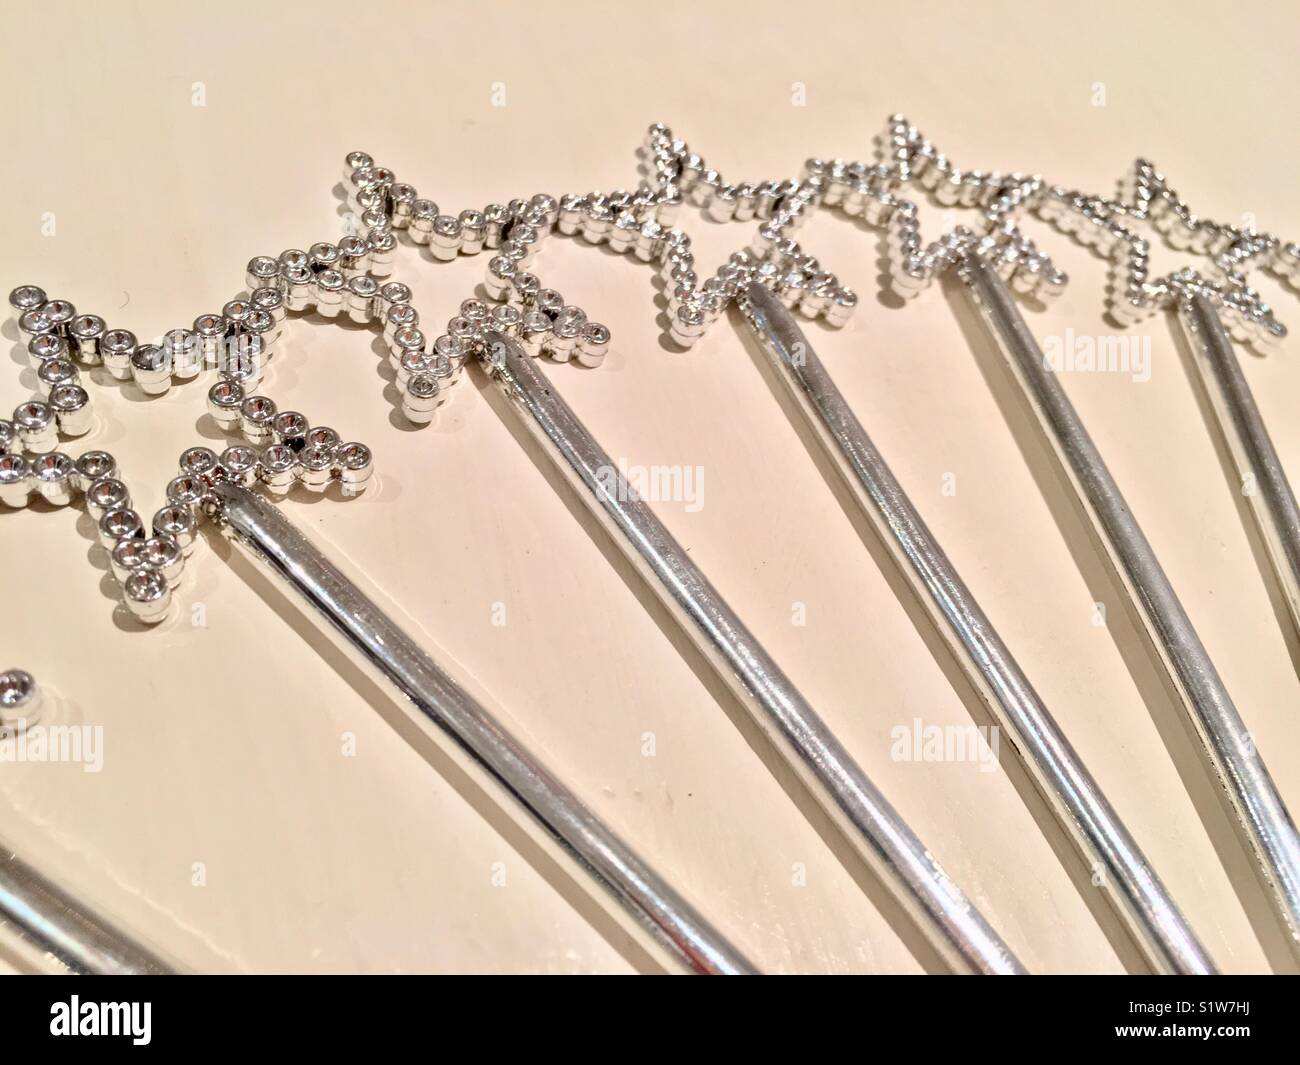 Fan of silver star wands on a white background Stock Photo